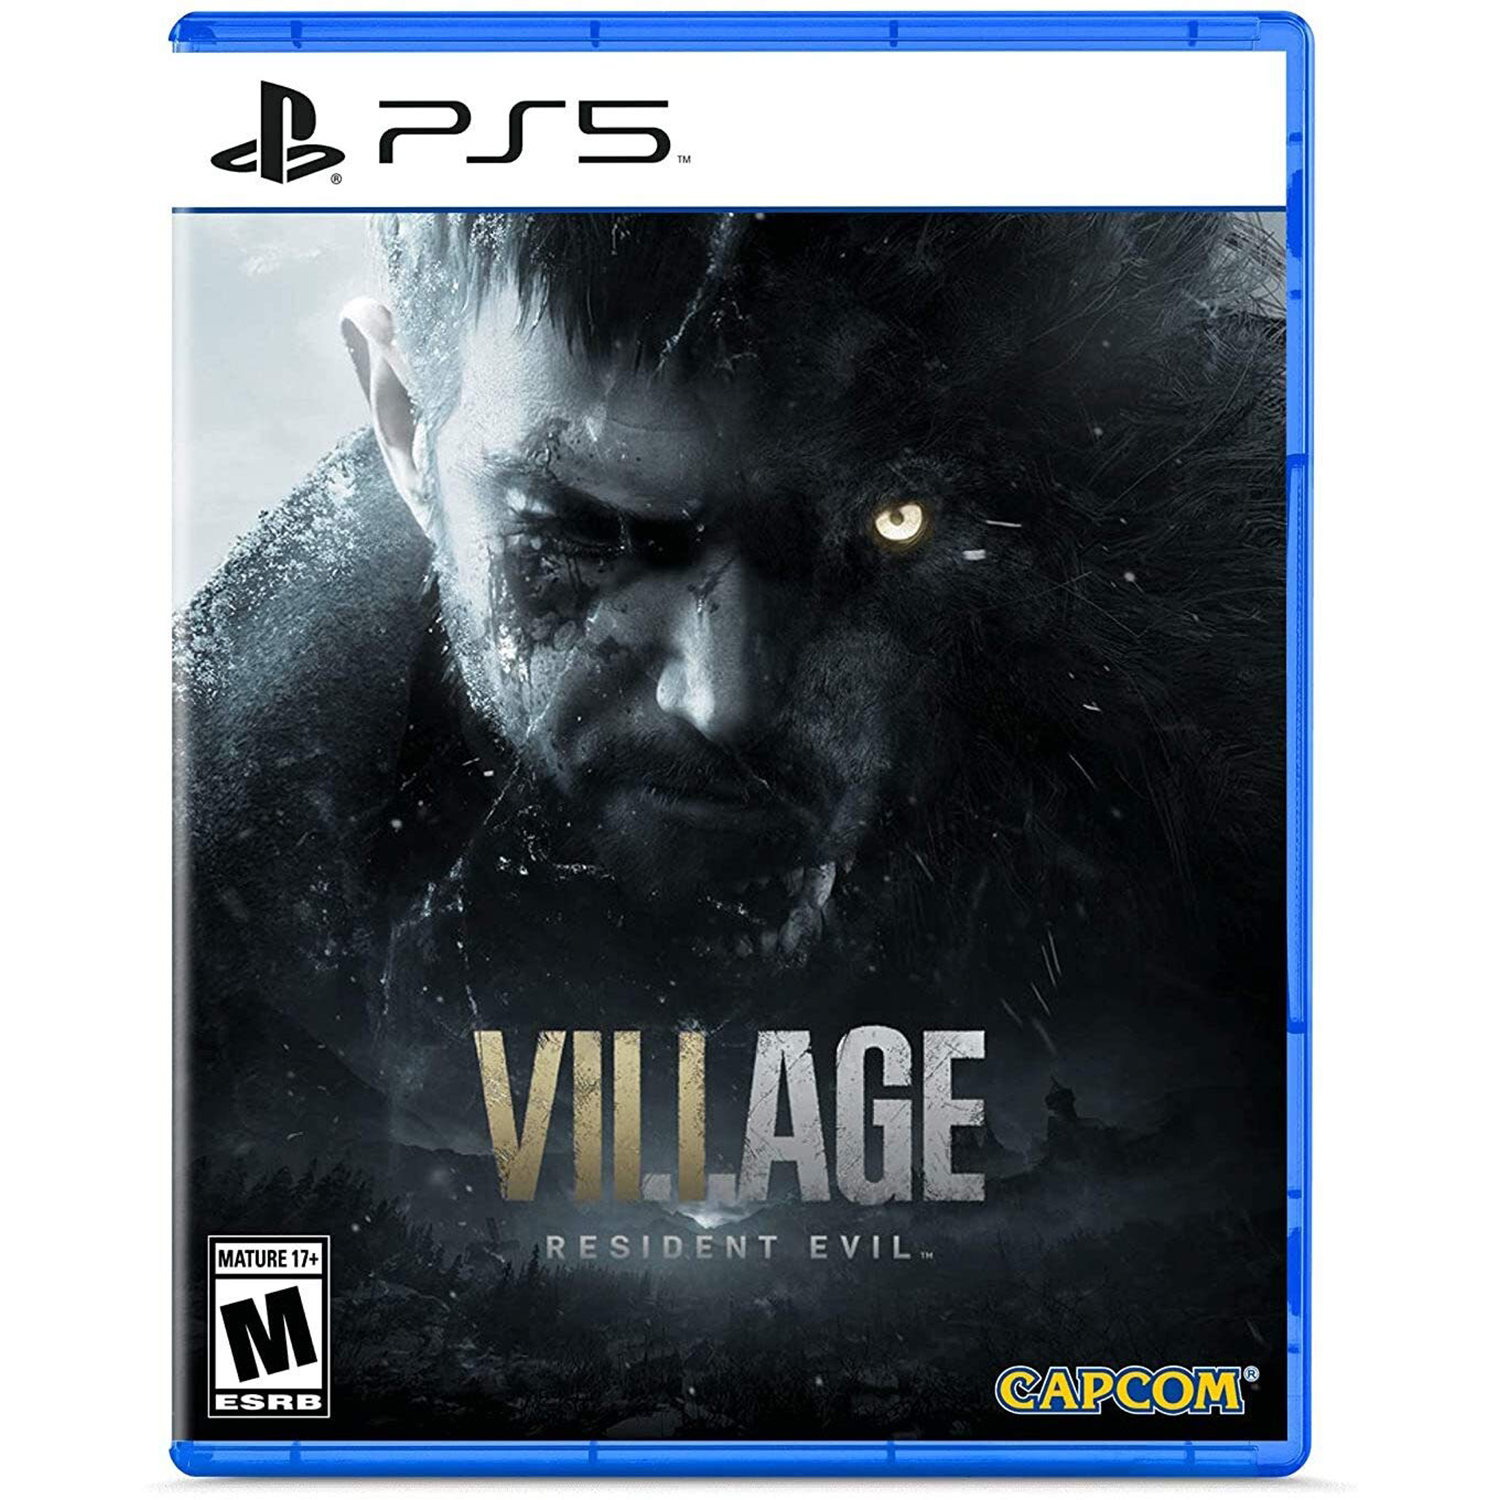 Resident Evil Village And The Nioh Collection - Two Games For PS5 - $144.00